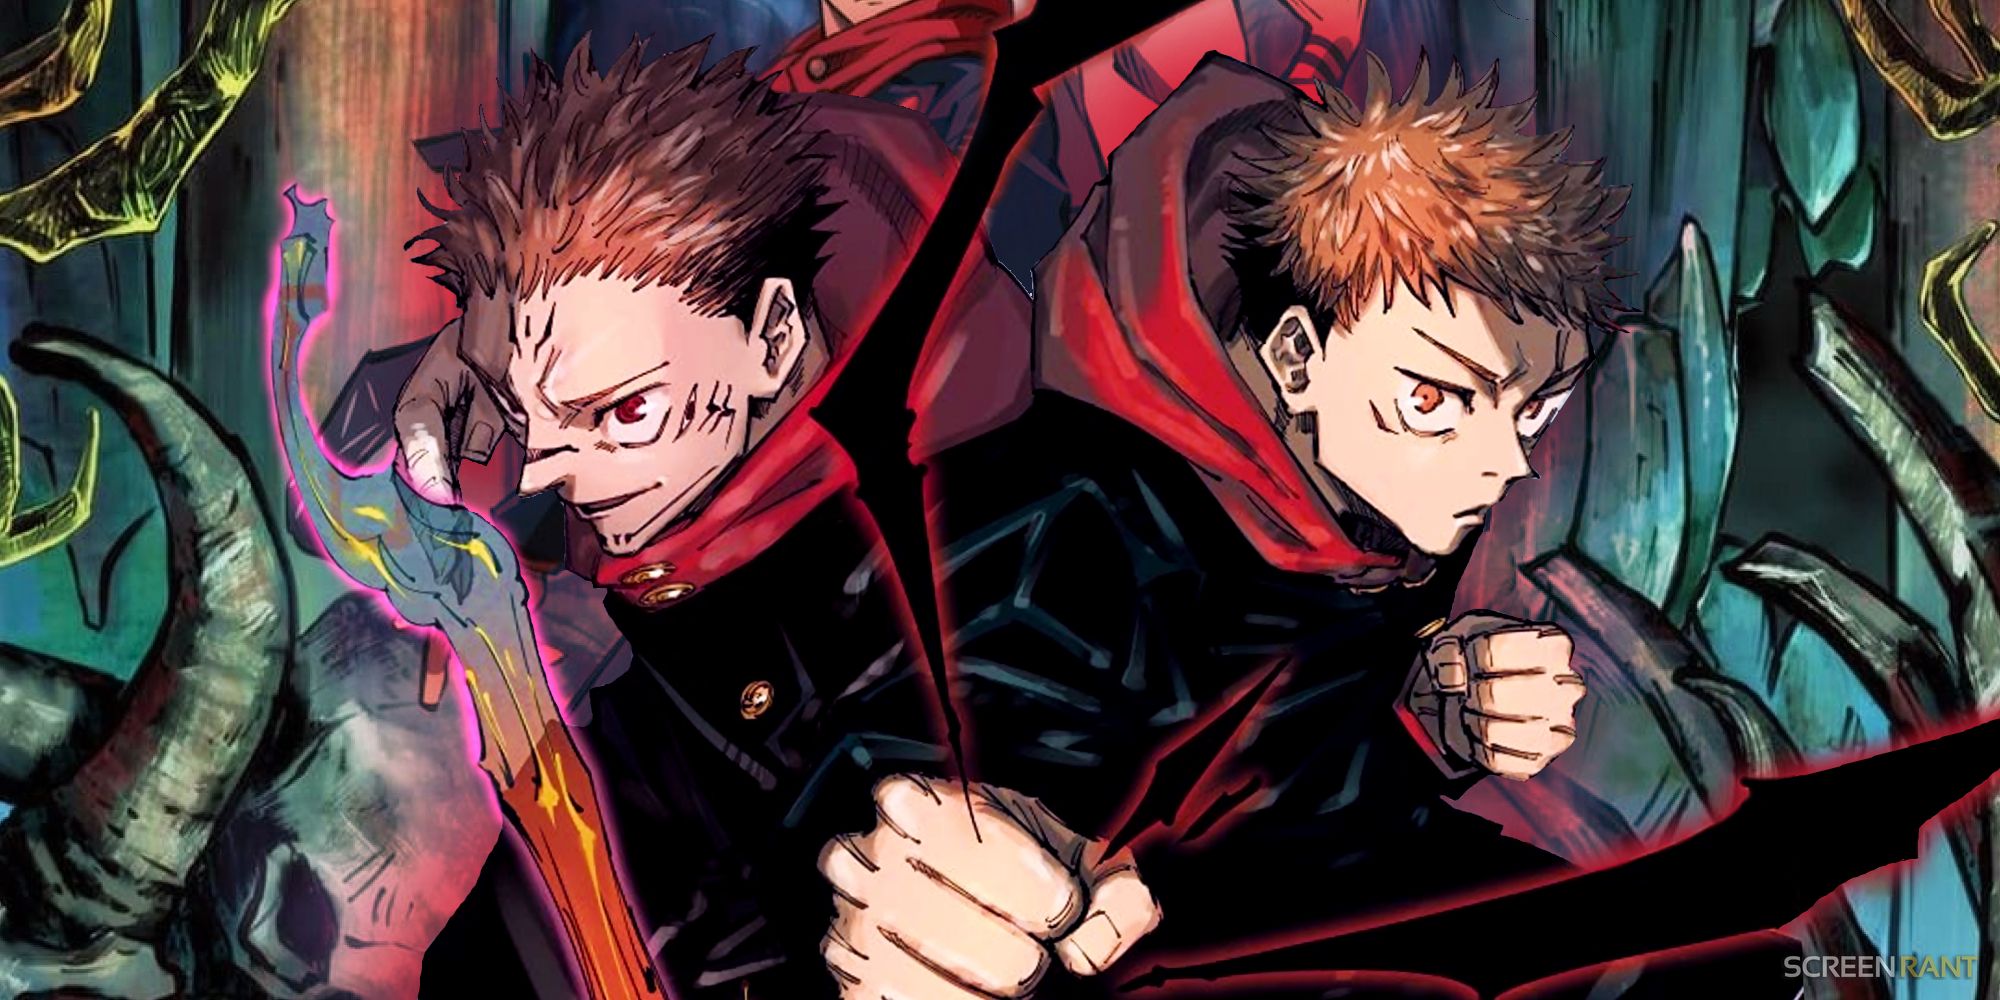 yuji and sukuna back to back in jujutsu kaisen with yuji surrounded by black flash sparks and sukuna using his fire arrow techniqiue